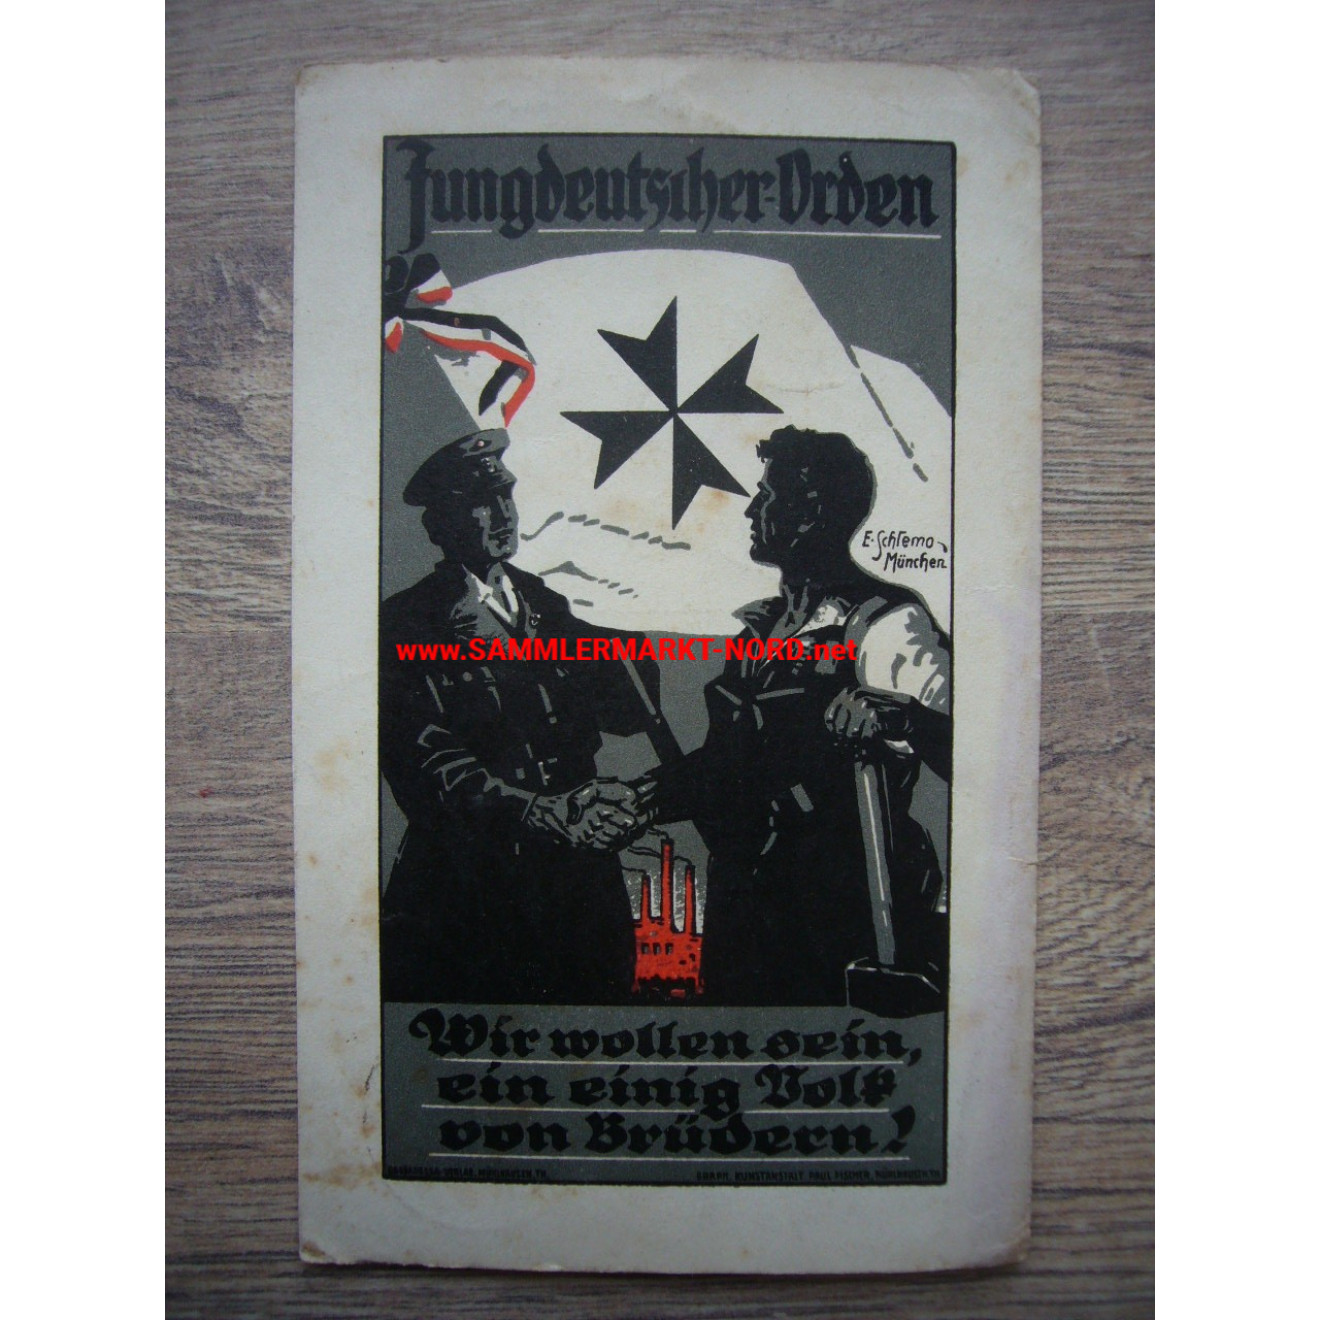 Young German Order - We want to be a united people of brothers - Postcard